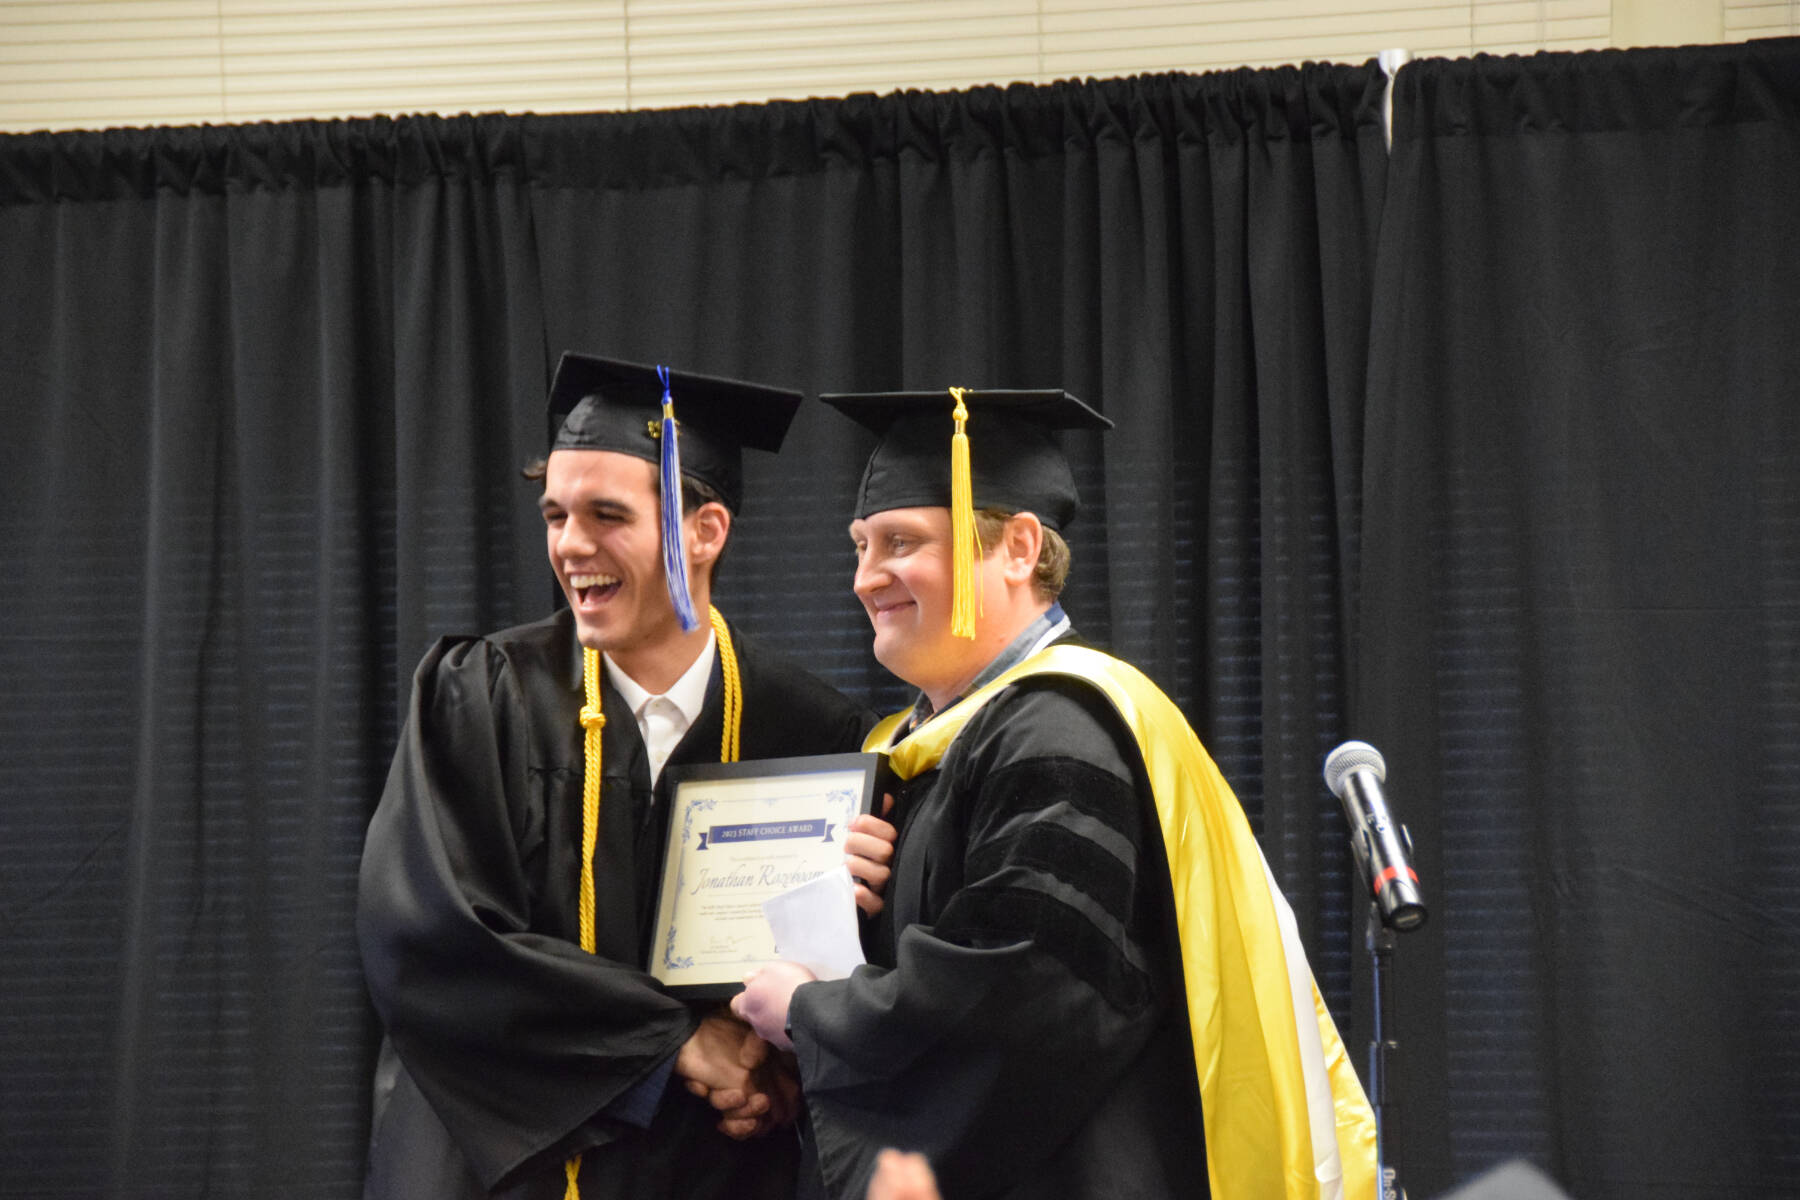 Kachemak Bay Campus Assistant Professor of History Dr. Jeff Meyers (right) presents the KBC Staff Choice award to Jonathan Rozeboom (left) during the 2023 KBC Commencement on Wednesday, May 10, 2023, in Homer, Alaska. (Photo by Delcenia Cosman/Homer News)